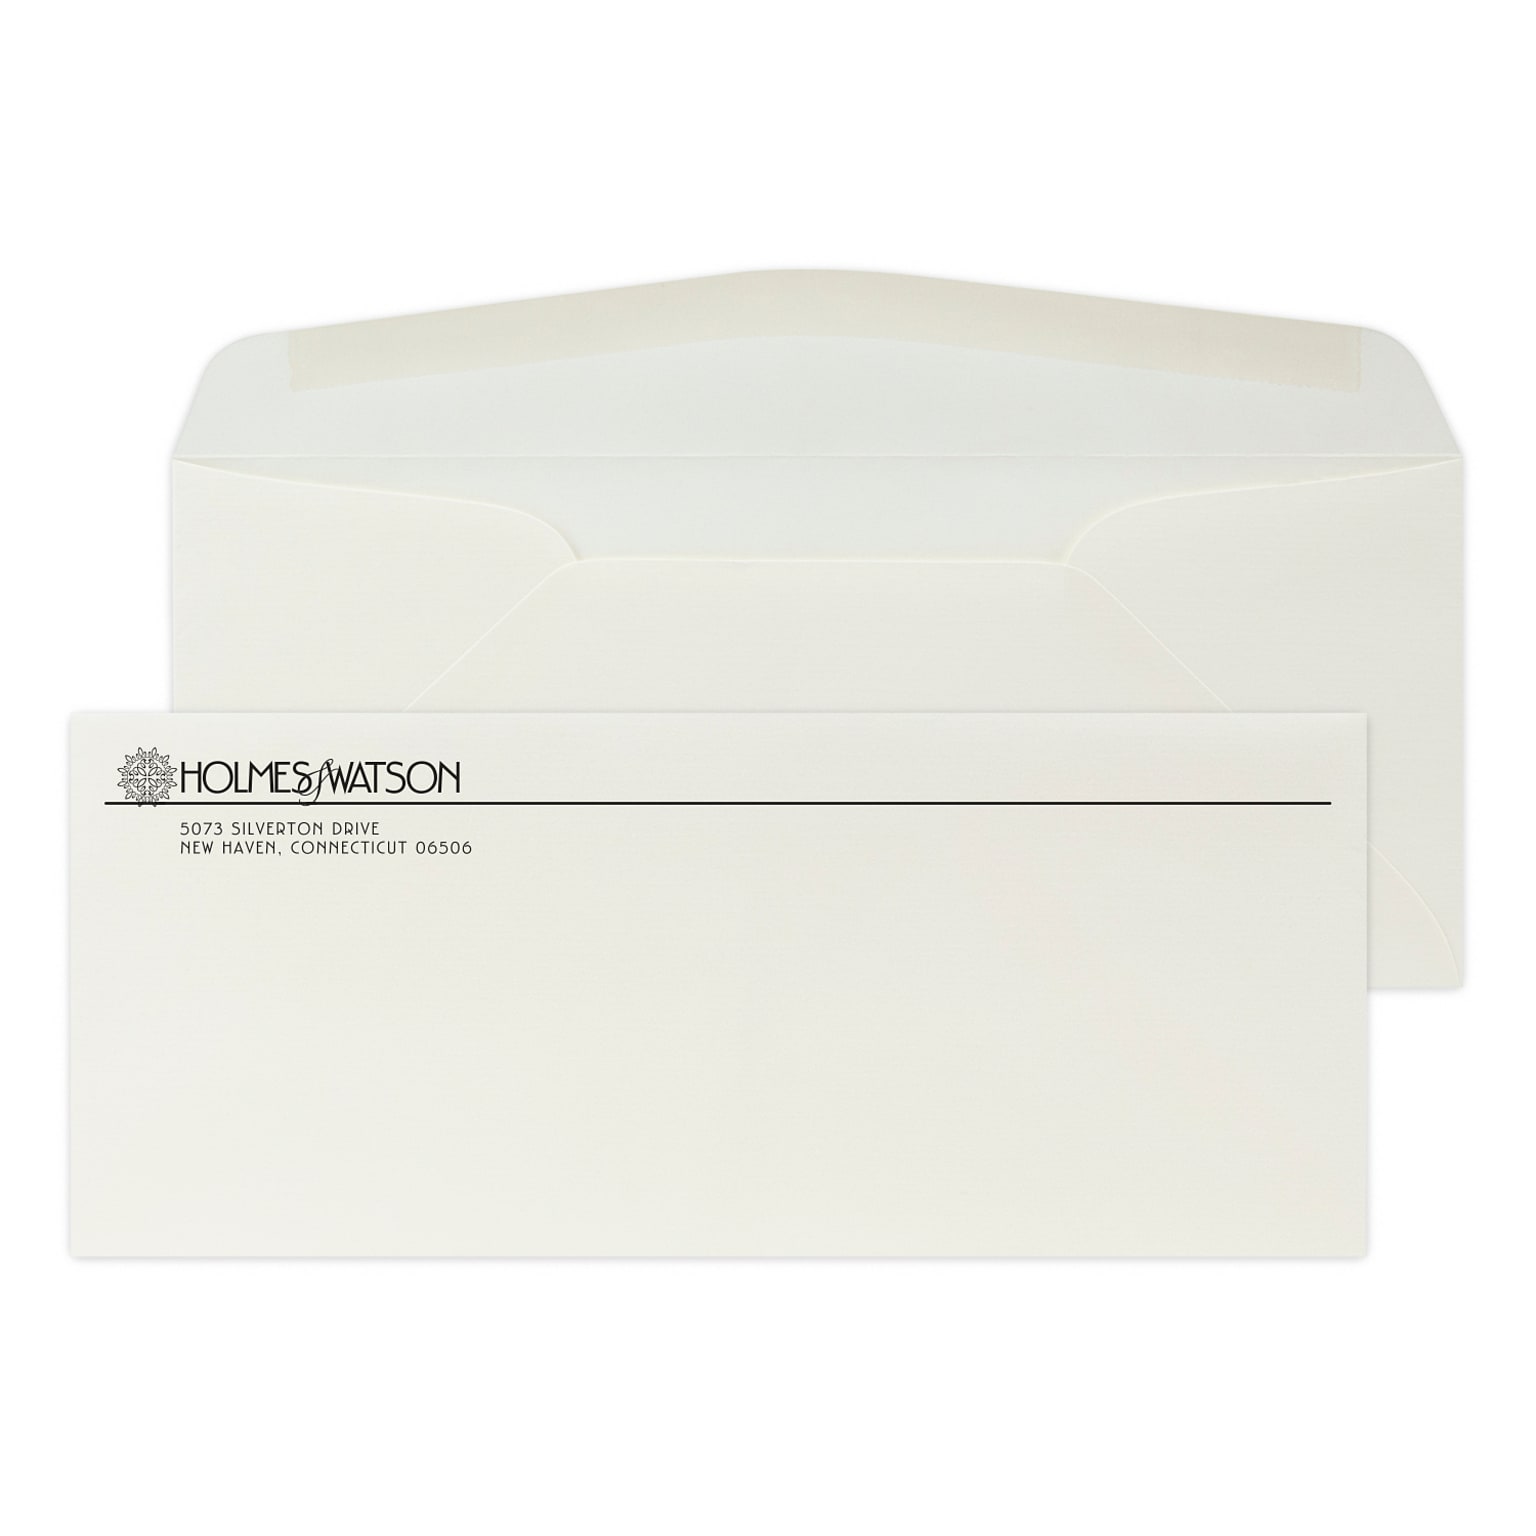 Custom #10 Stationery Envelopes, 4 1/4 x 9 1/2, 24# CLASSIC® LAID Natural White, 1 Standard Flat Ink, 250 / Pack